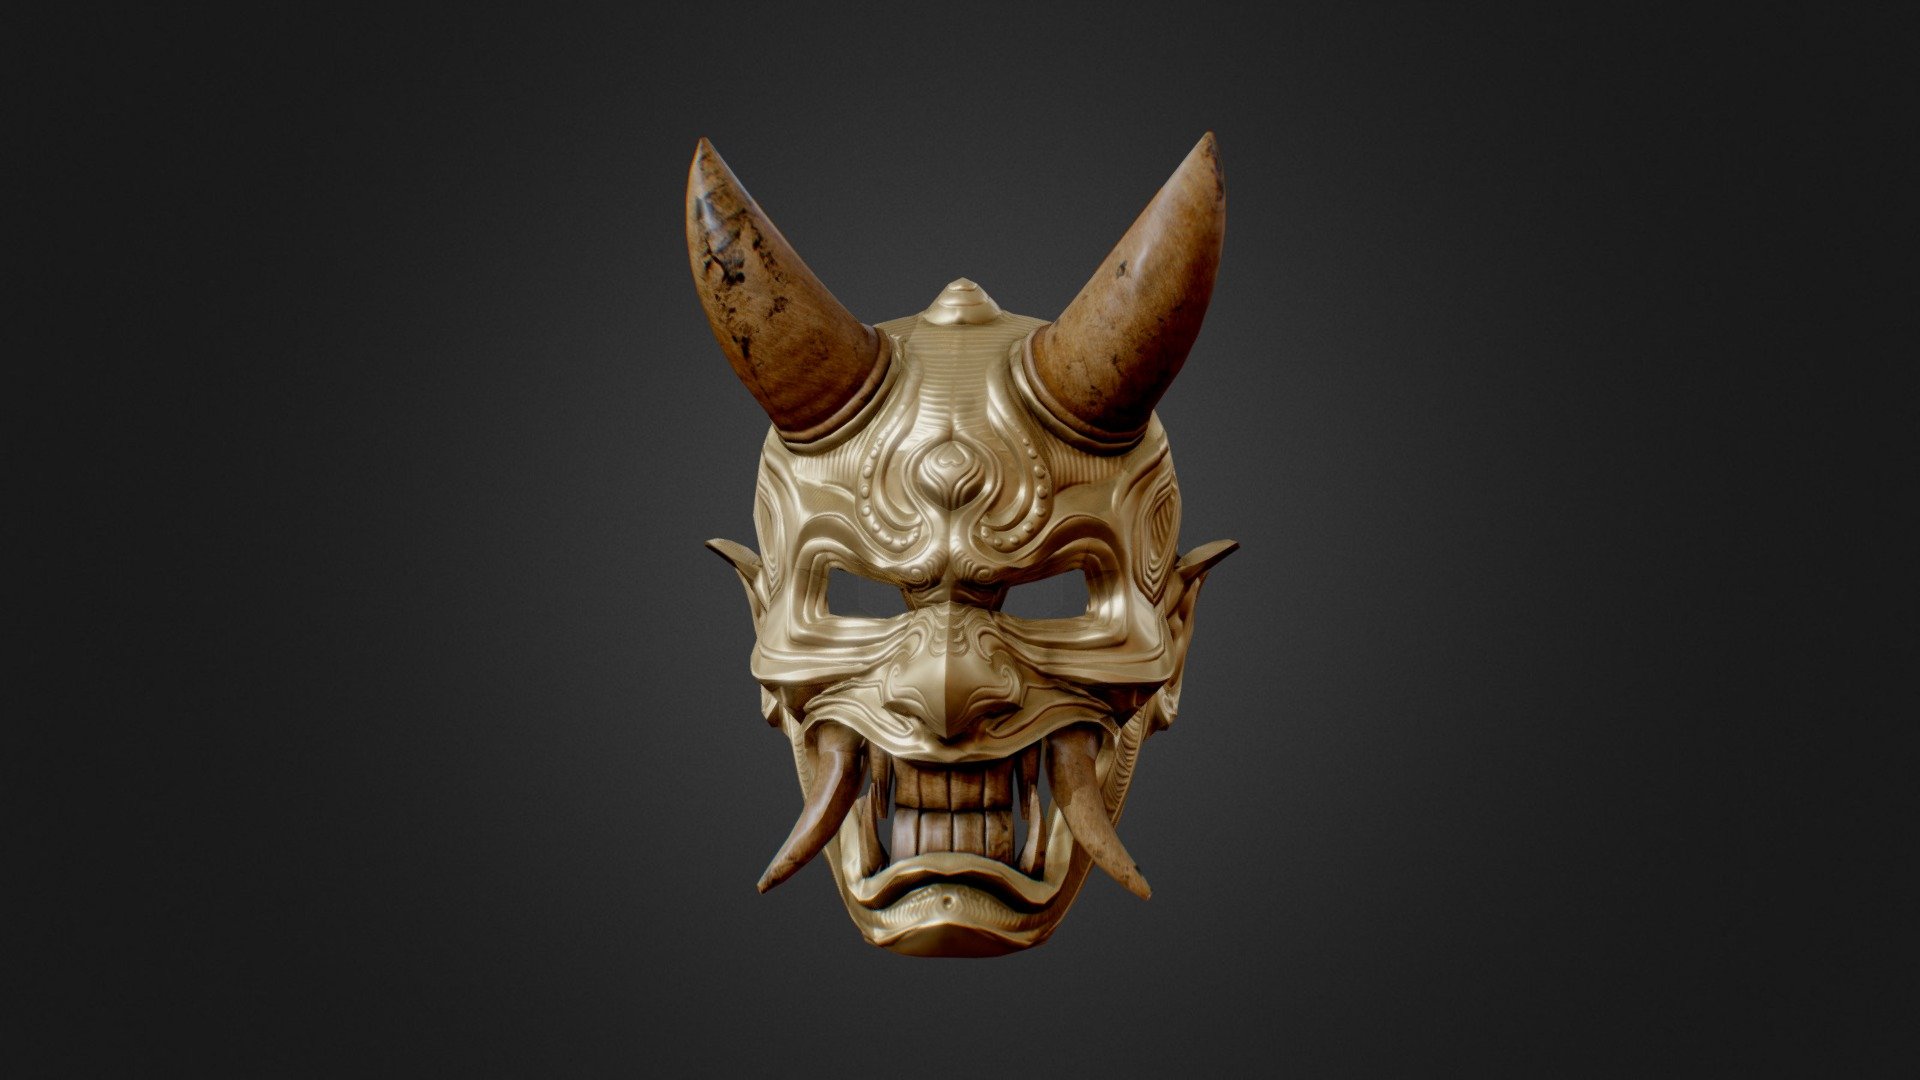 Low poly Textured Oni mask 3d model